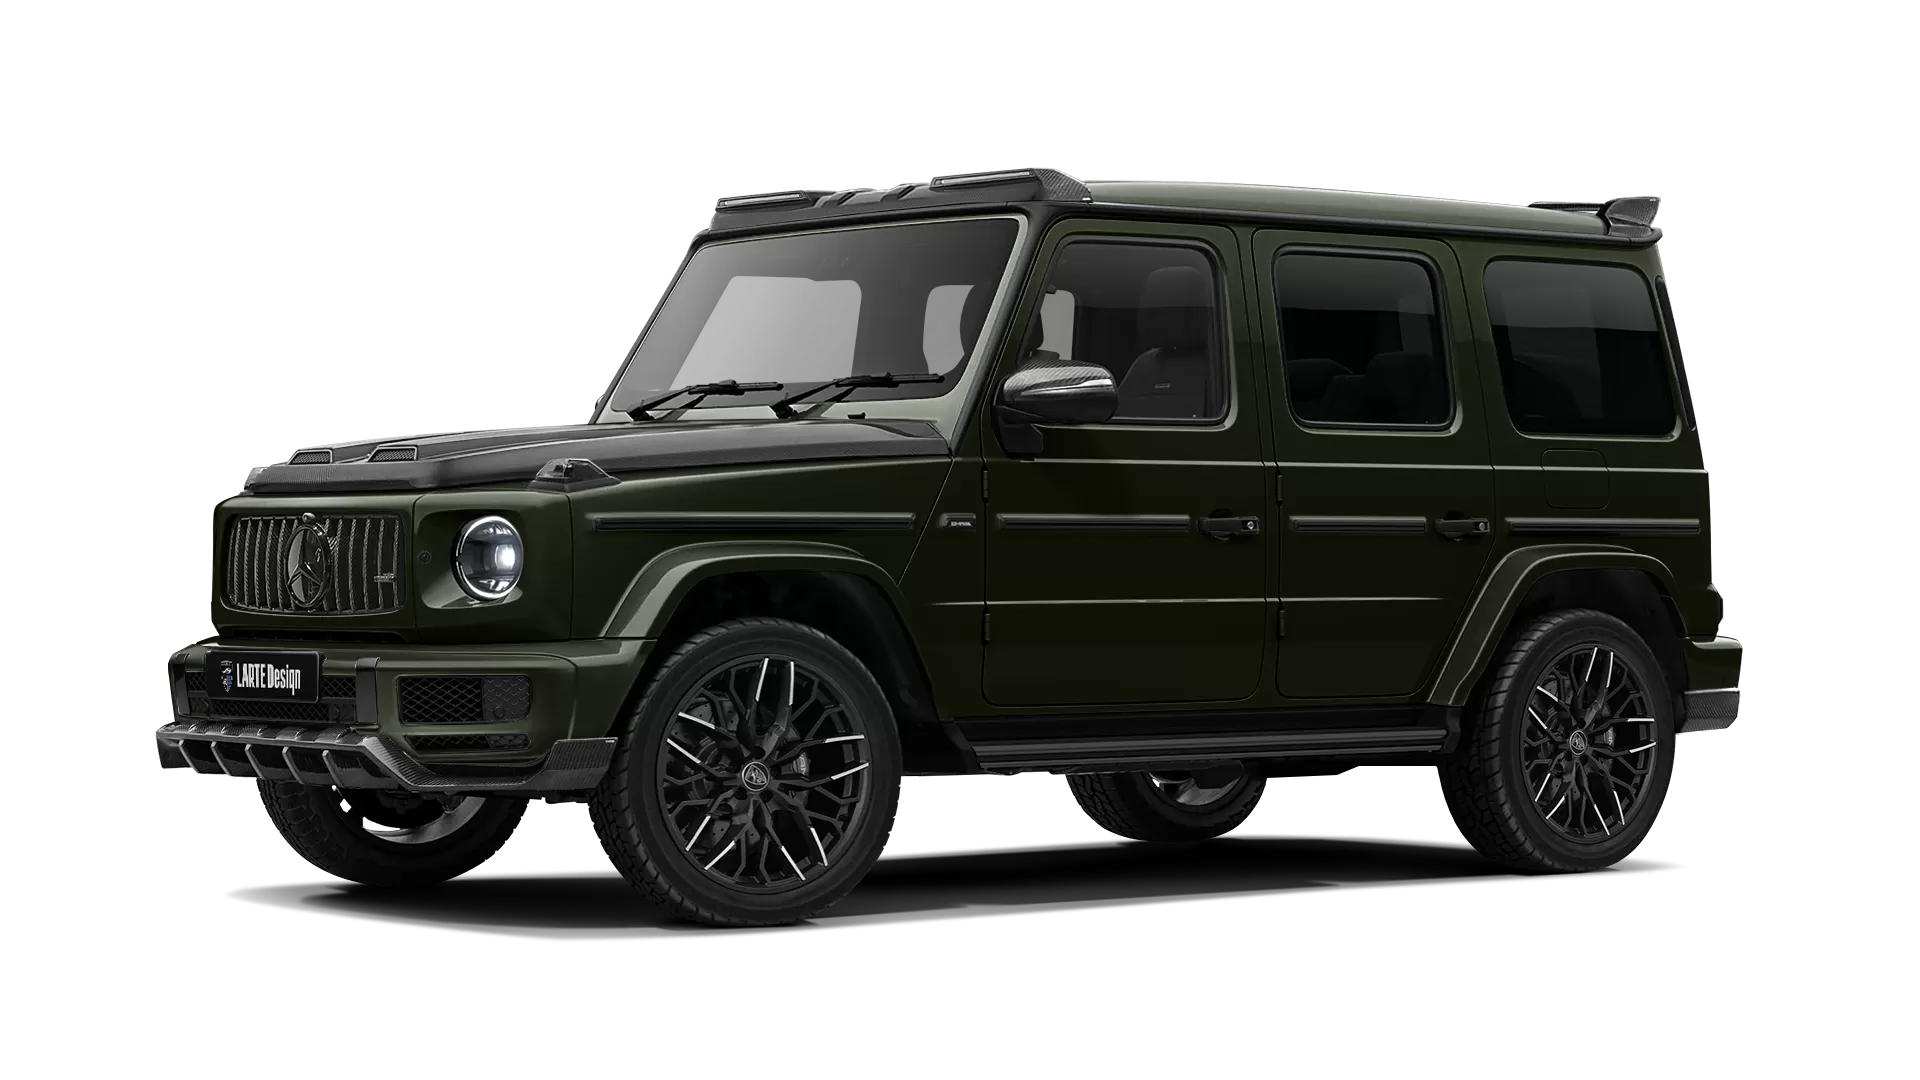 Mercedes G class W463 with carbon body kit: front view shown in Dark Olive